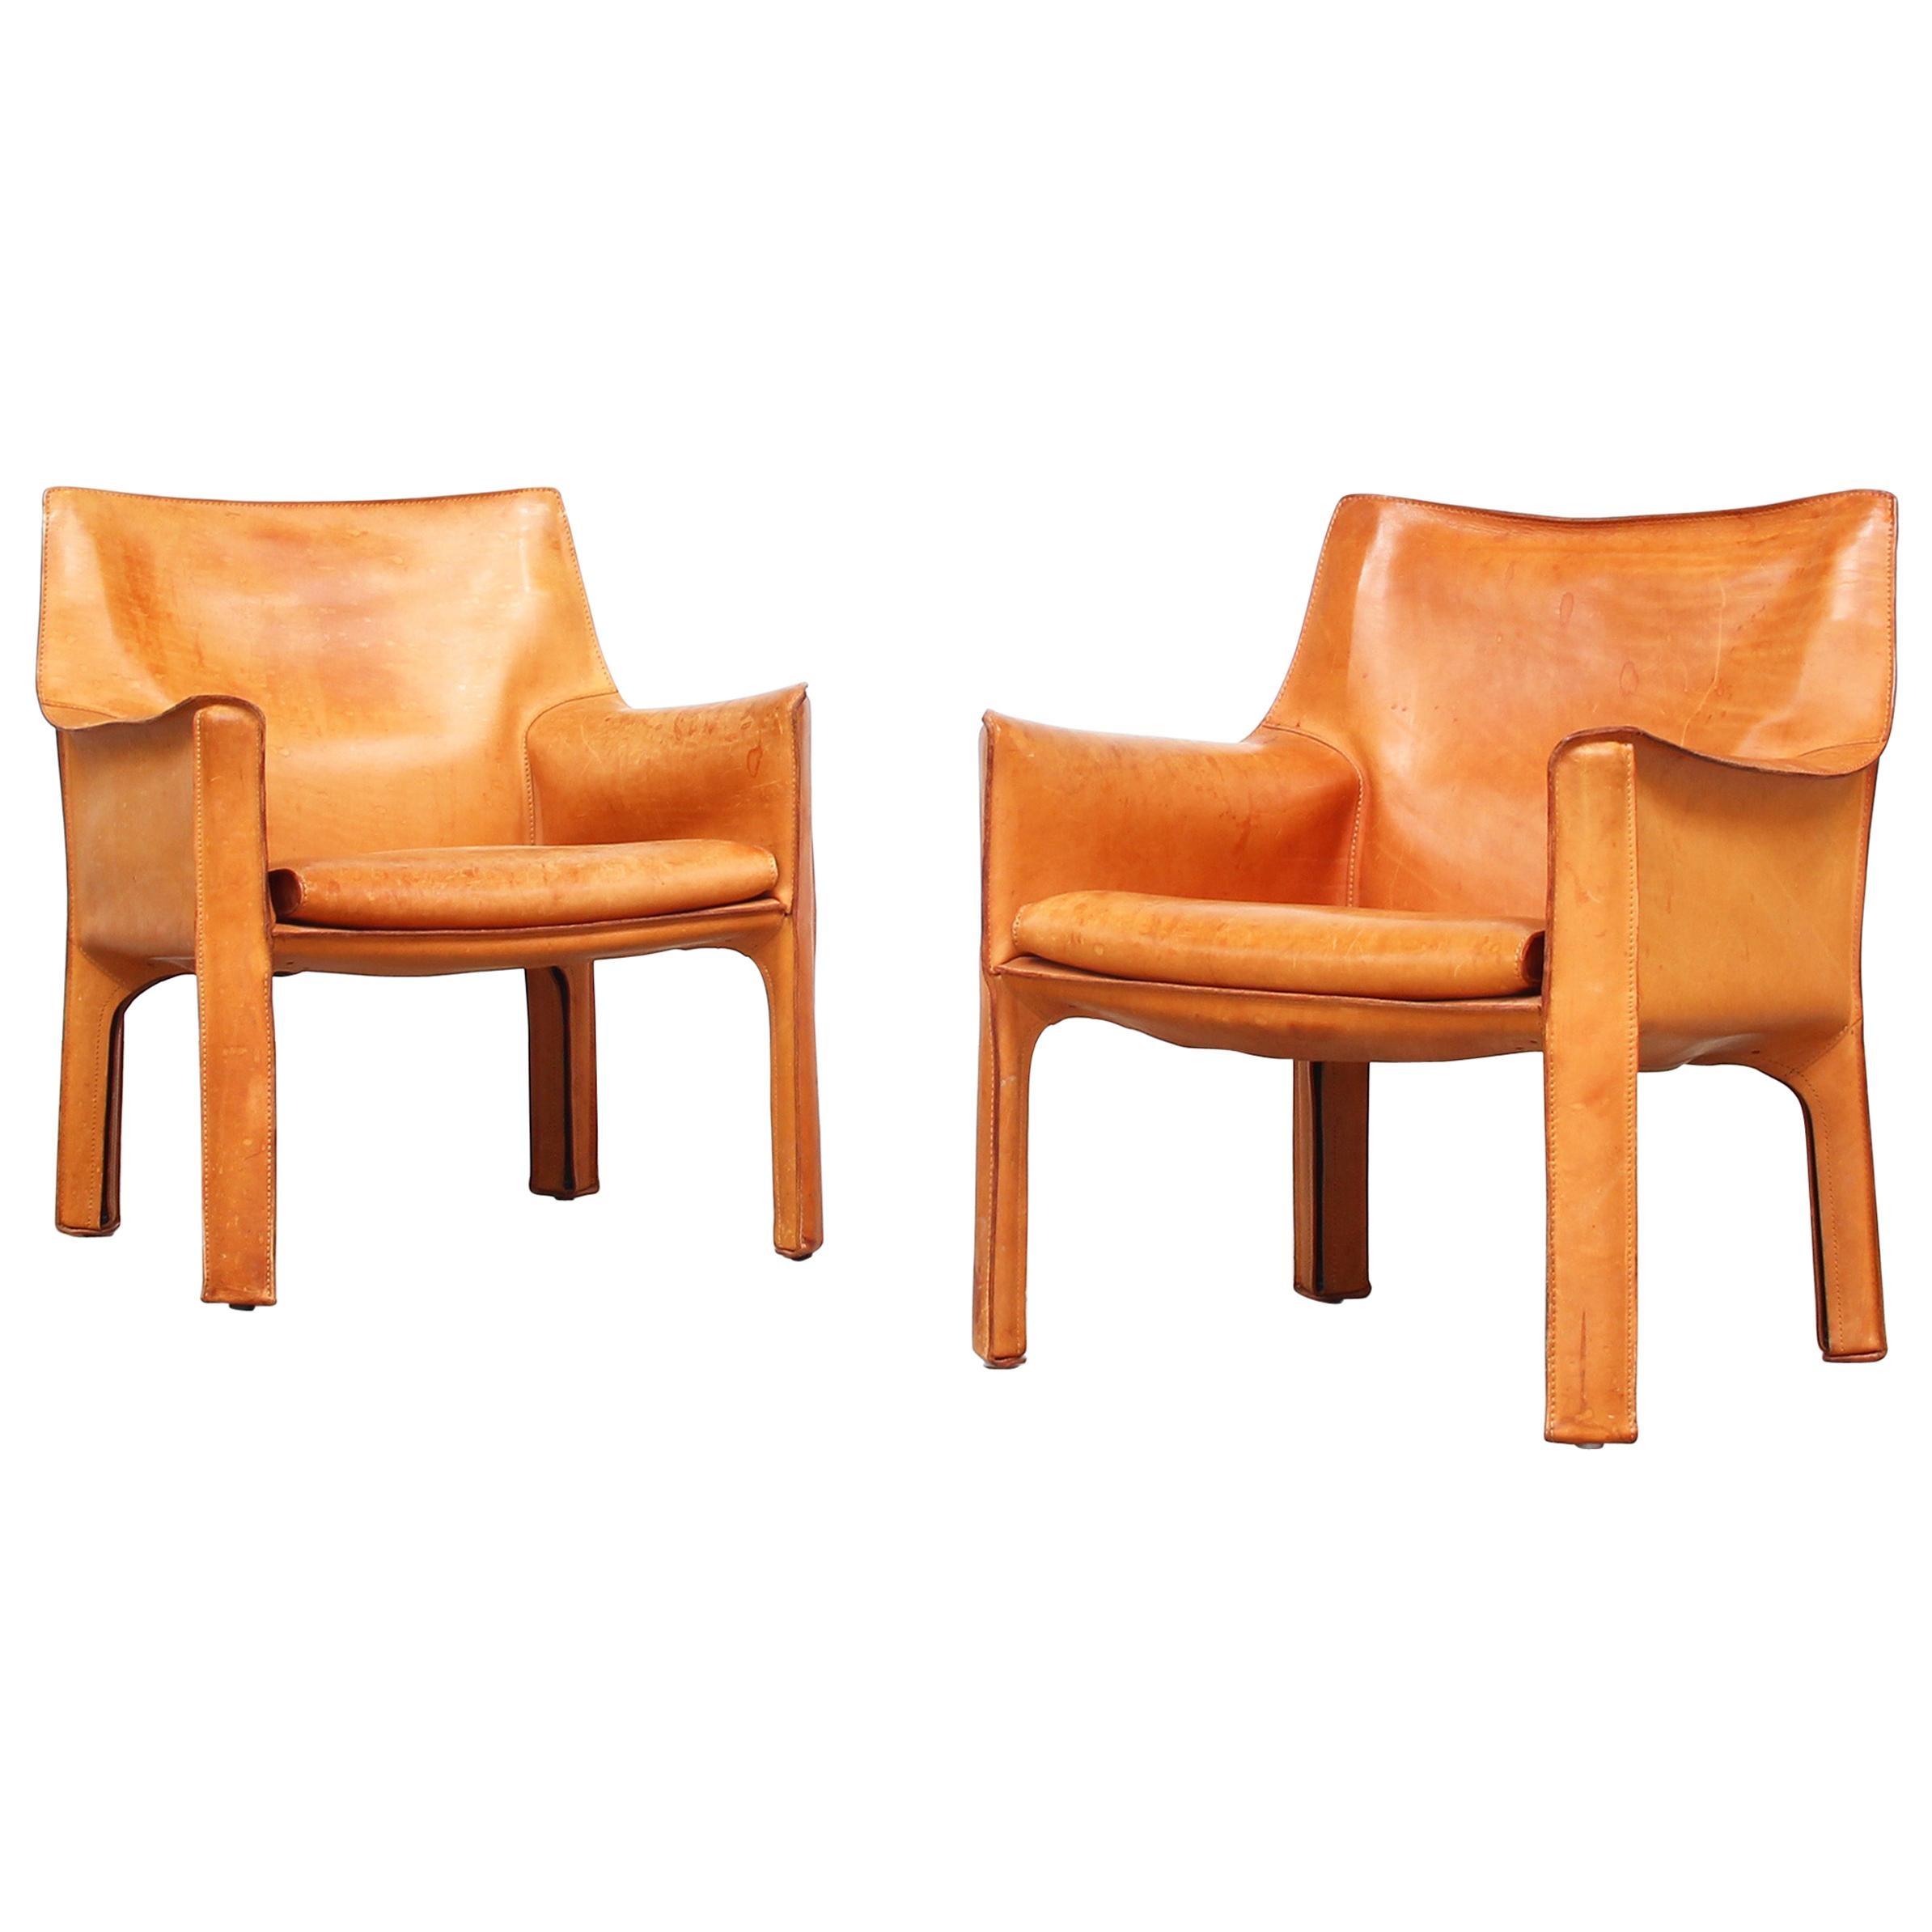 Pair of Lounge Chairs by Mario Bellini for Cassina Italy 1980s Leather